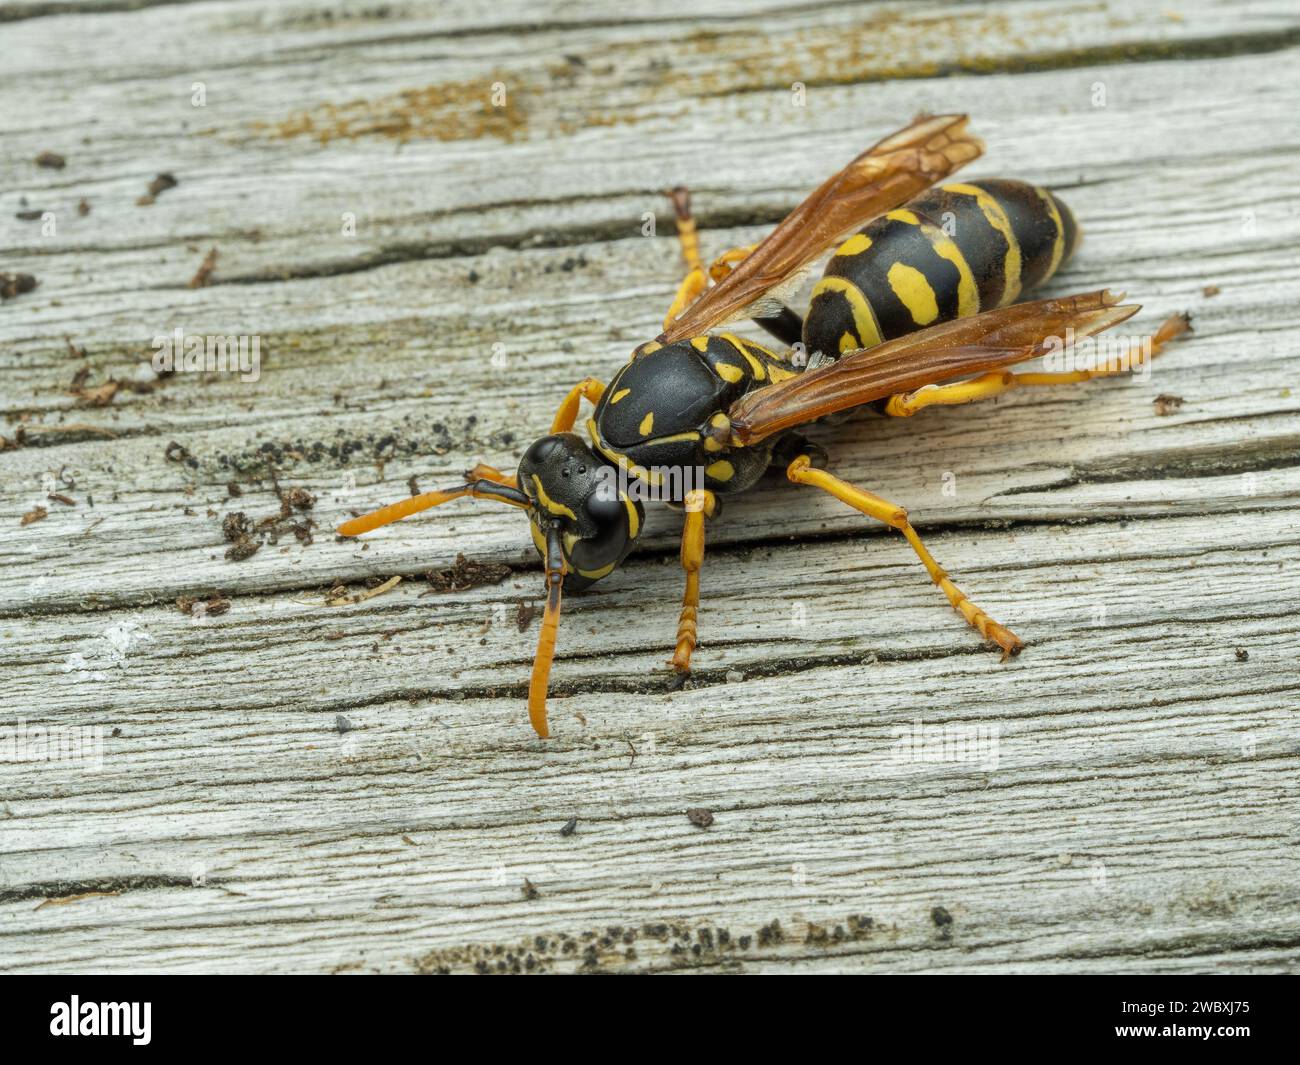 A beautiful European paper wasp, Polistes dominula, resting on weathered wood, from above Stock Photo